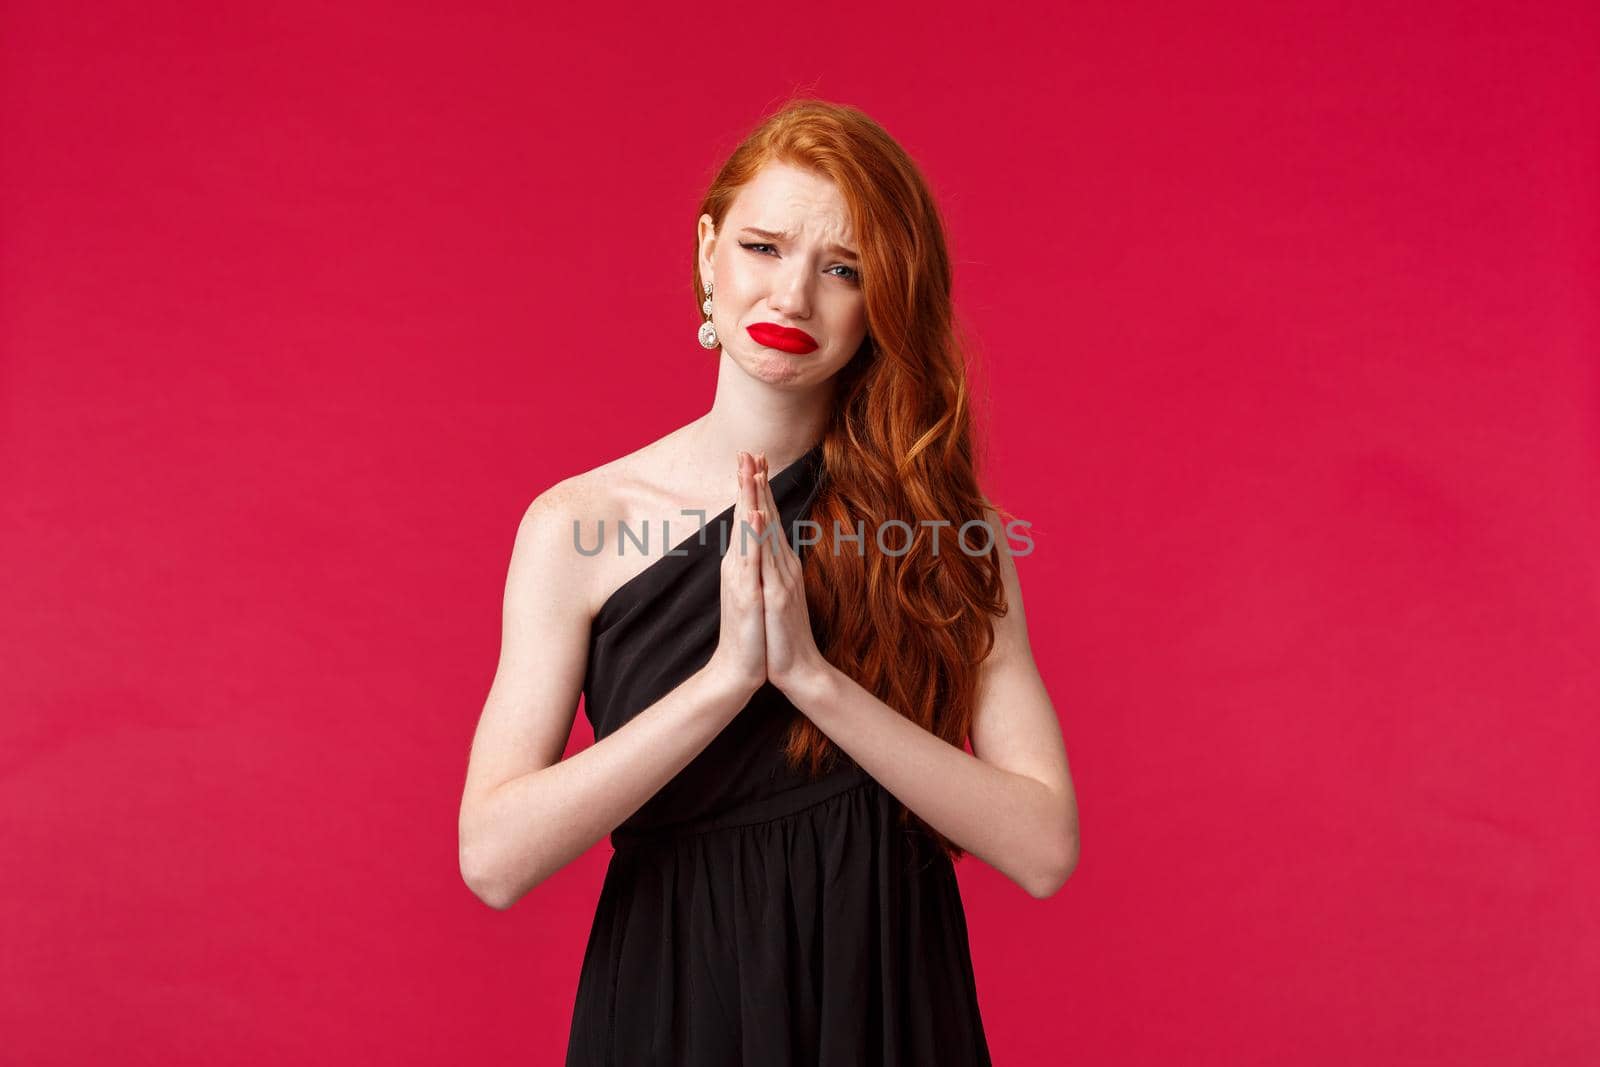 Portrait of upset and sad cute gloomy redhead woman in black evening dress, whining begging for help, need something badly, grimacing crying desperate, praying over red background.